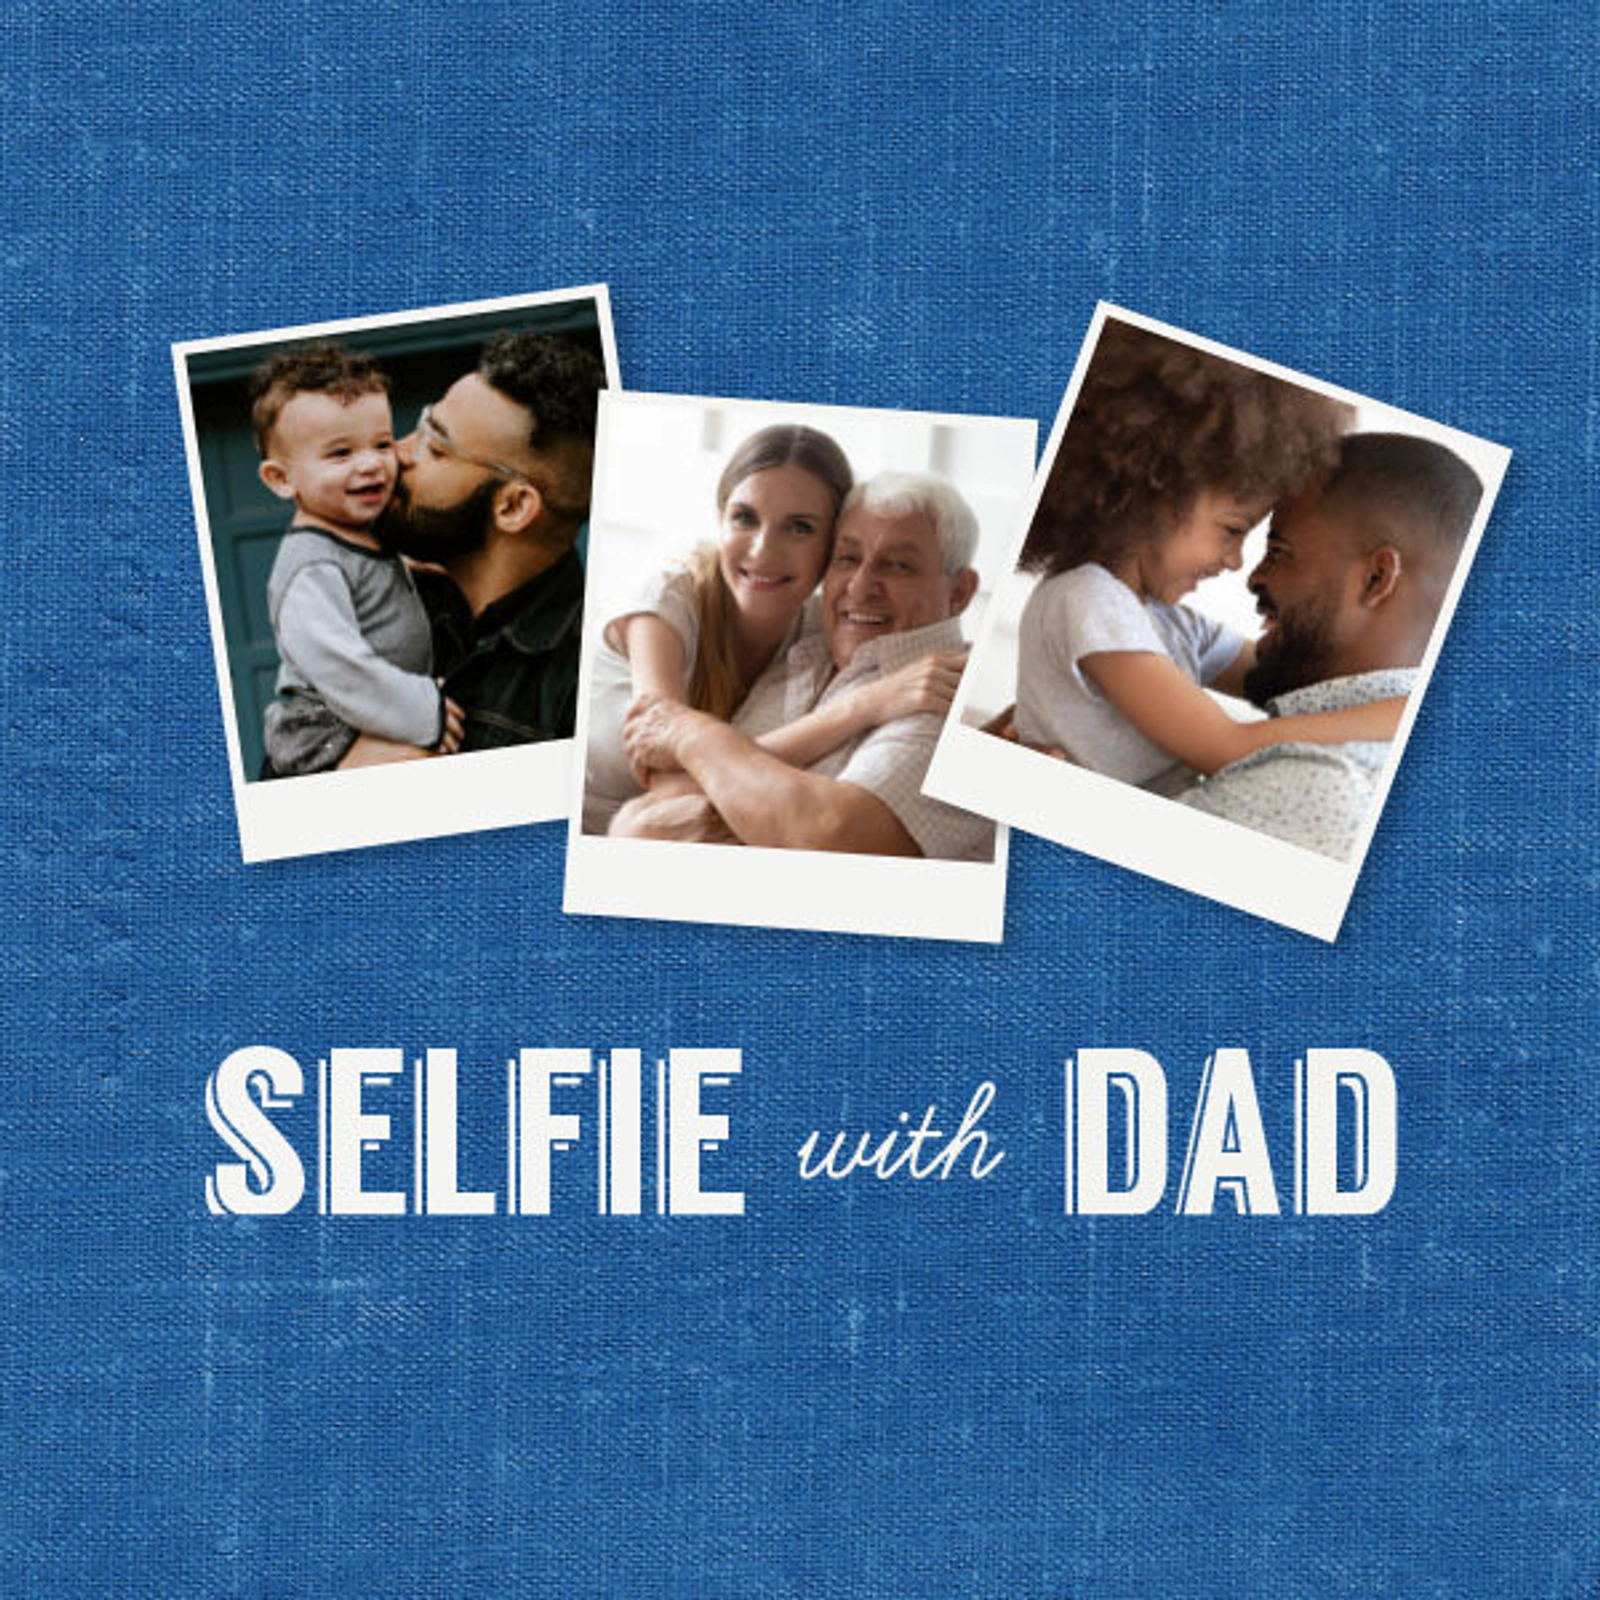 Selfie With Dad Photo Contest! - Thumbnail Image